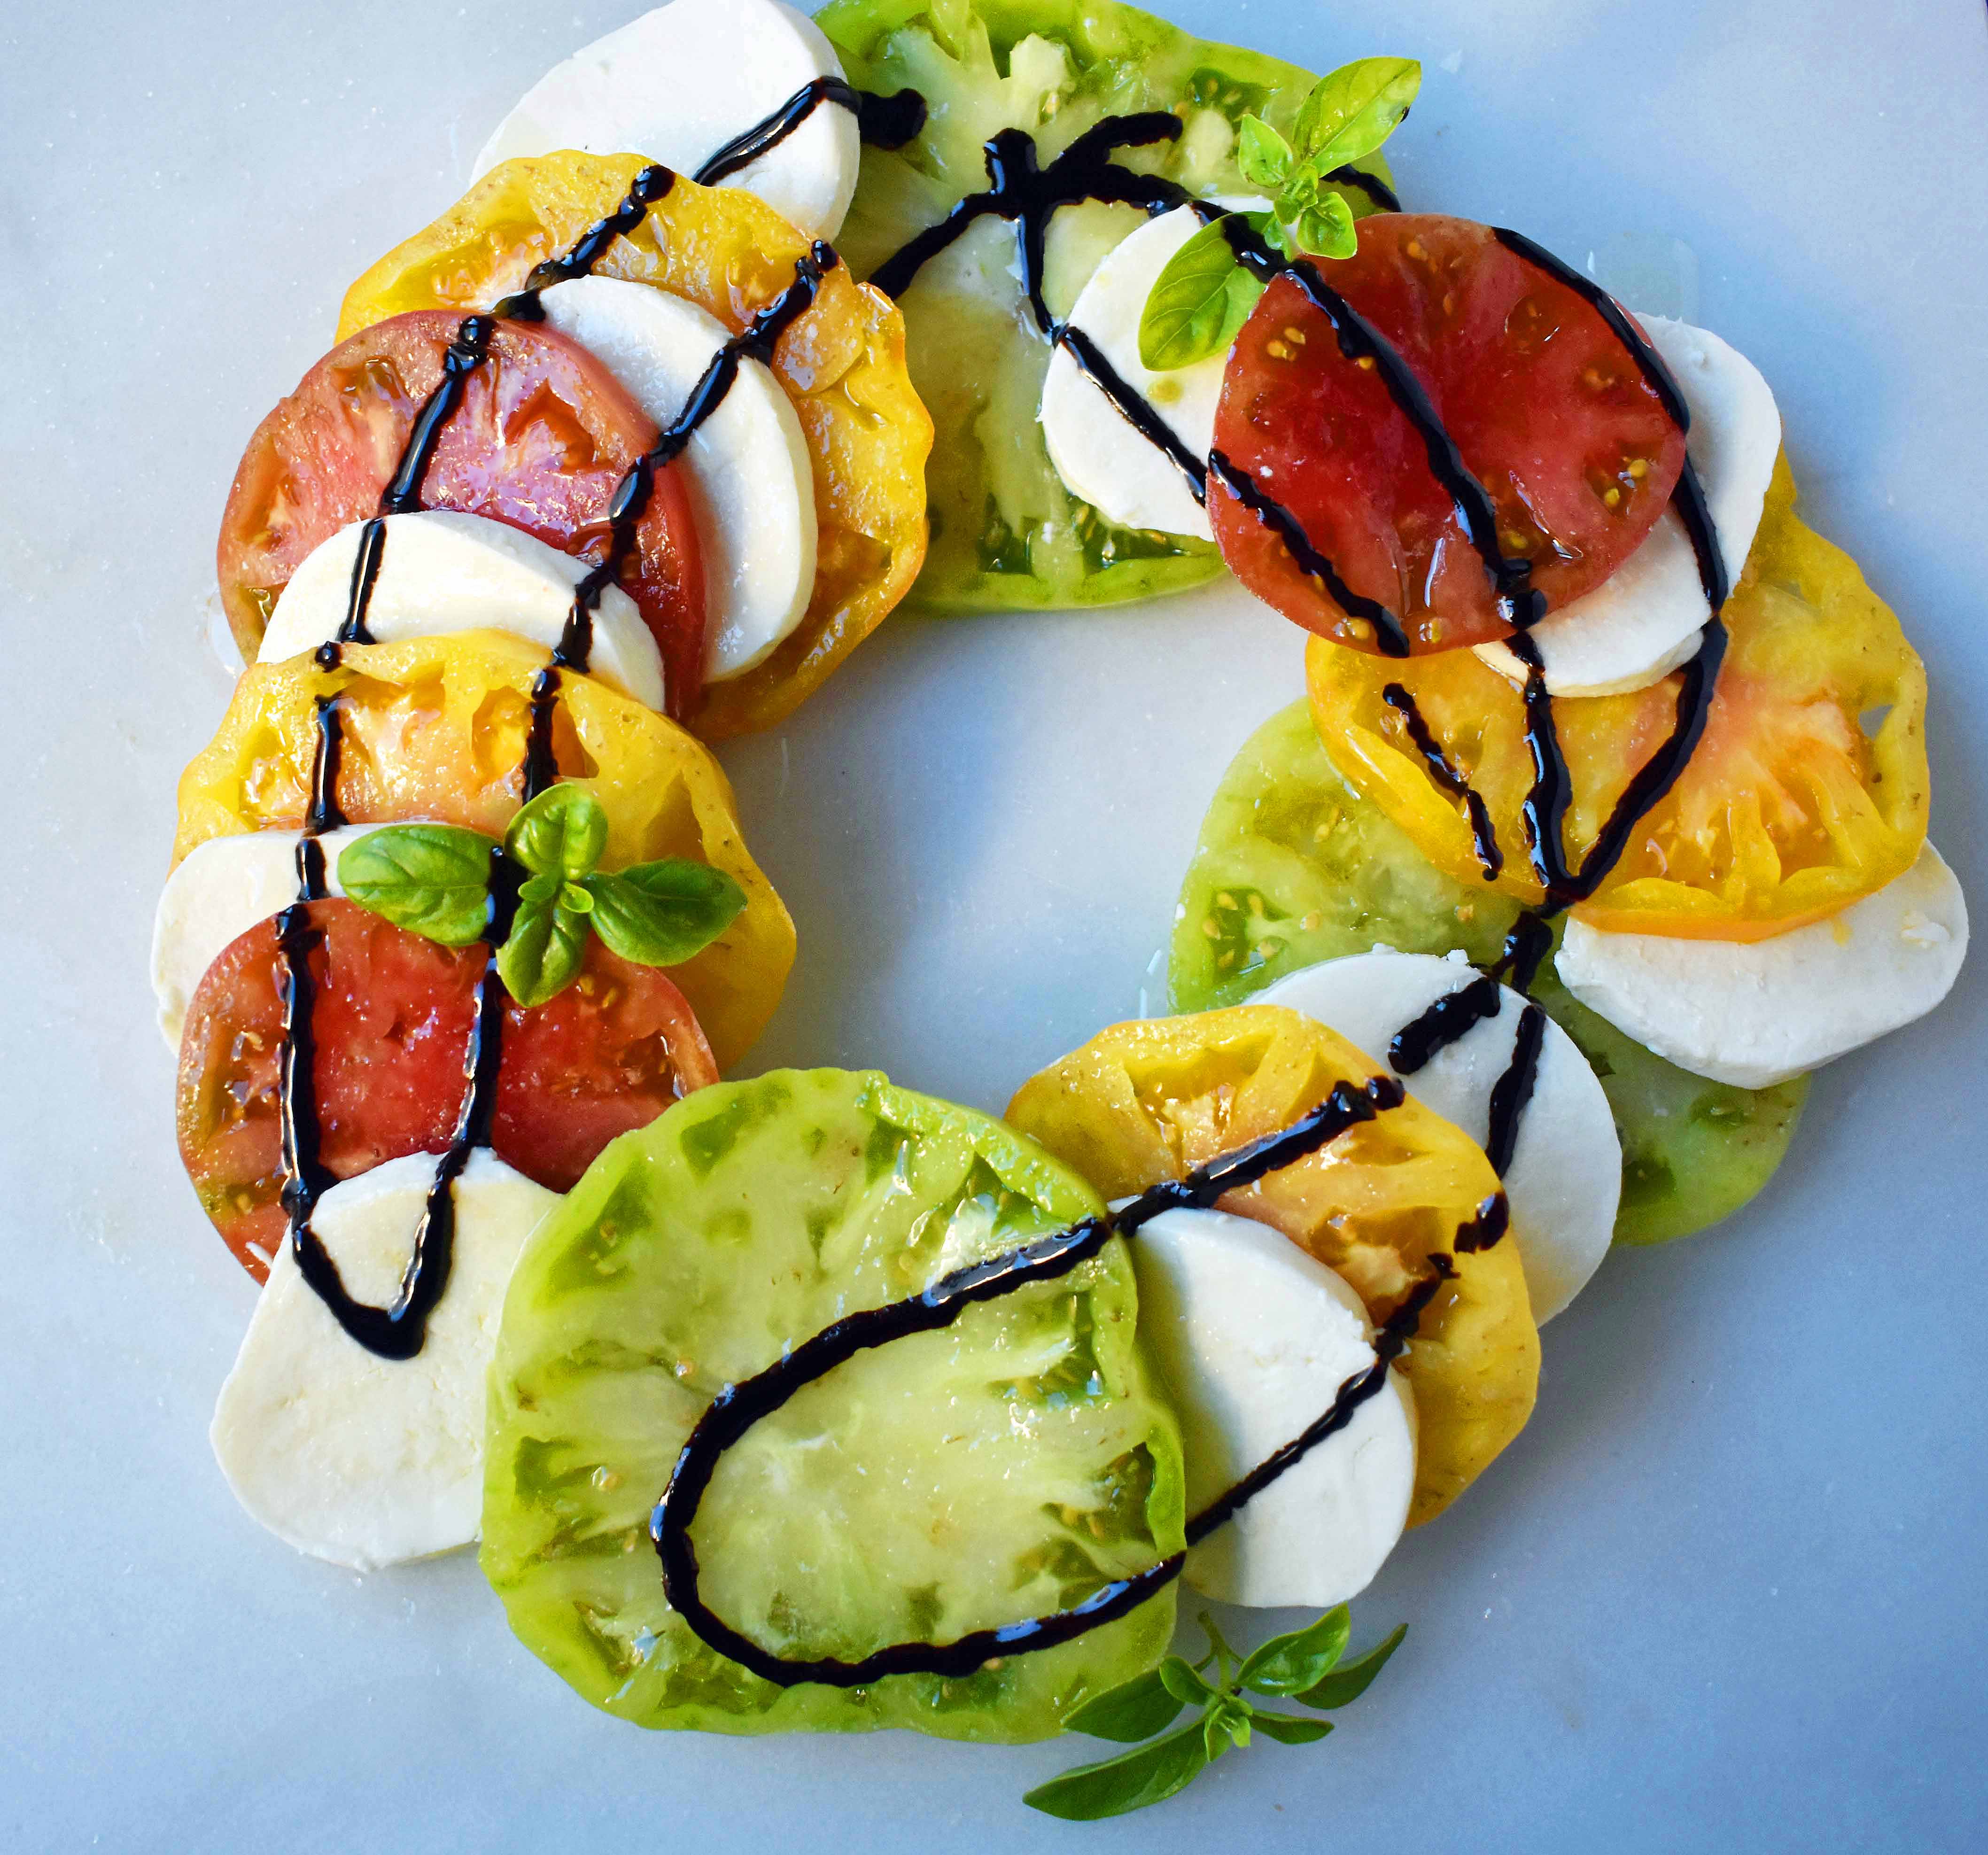 Heirloom Tomato Caprese Salad by Modern Honey. Garden Heirloom tomatoes layered with fresh mozzarella slices, extra virgin olive oil, balsamic glaze, salt, and fresh basil. A beautiful and healthy appetizer. www.modernhoney.com